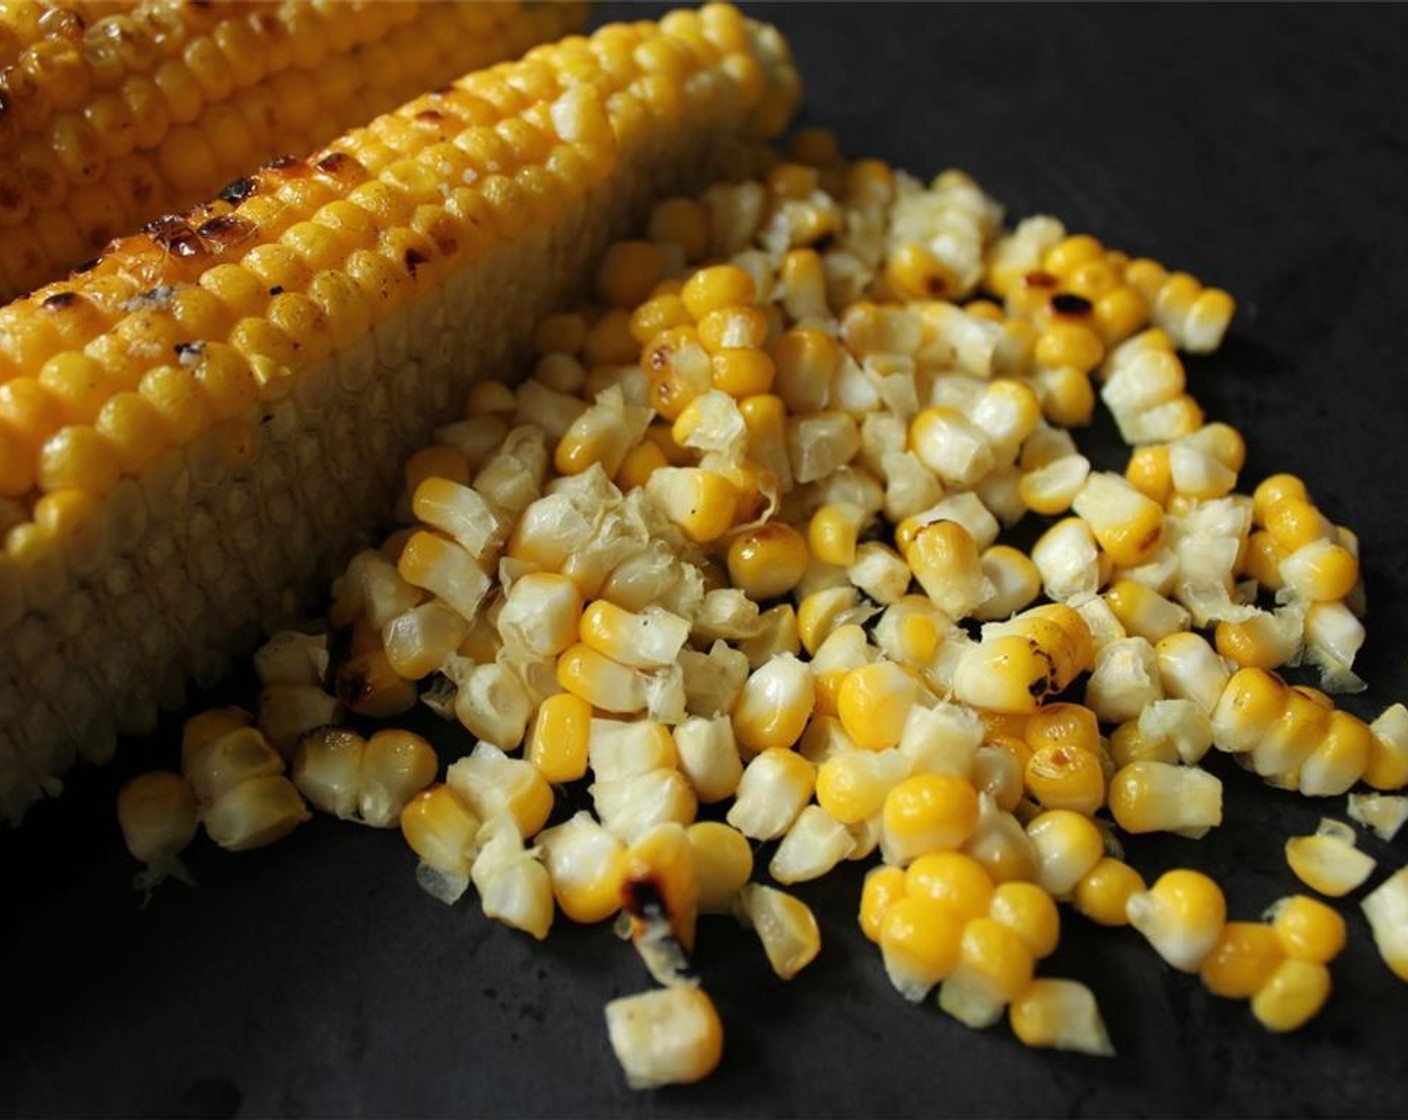 step 7 Remove corn from the pan and let cool. When the corn is cool enough to handle, use a sharp knife to slice the kernels from the cob. Set aside until ready to use.